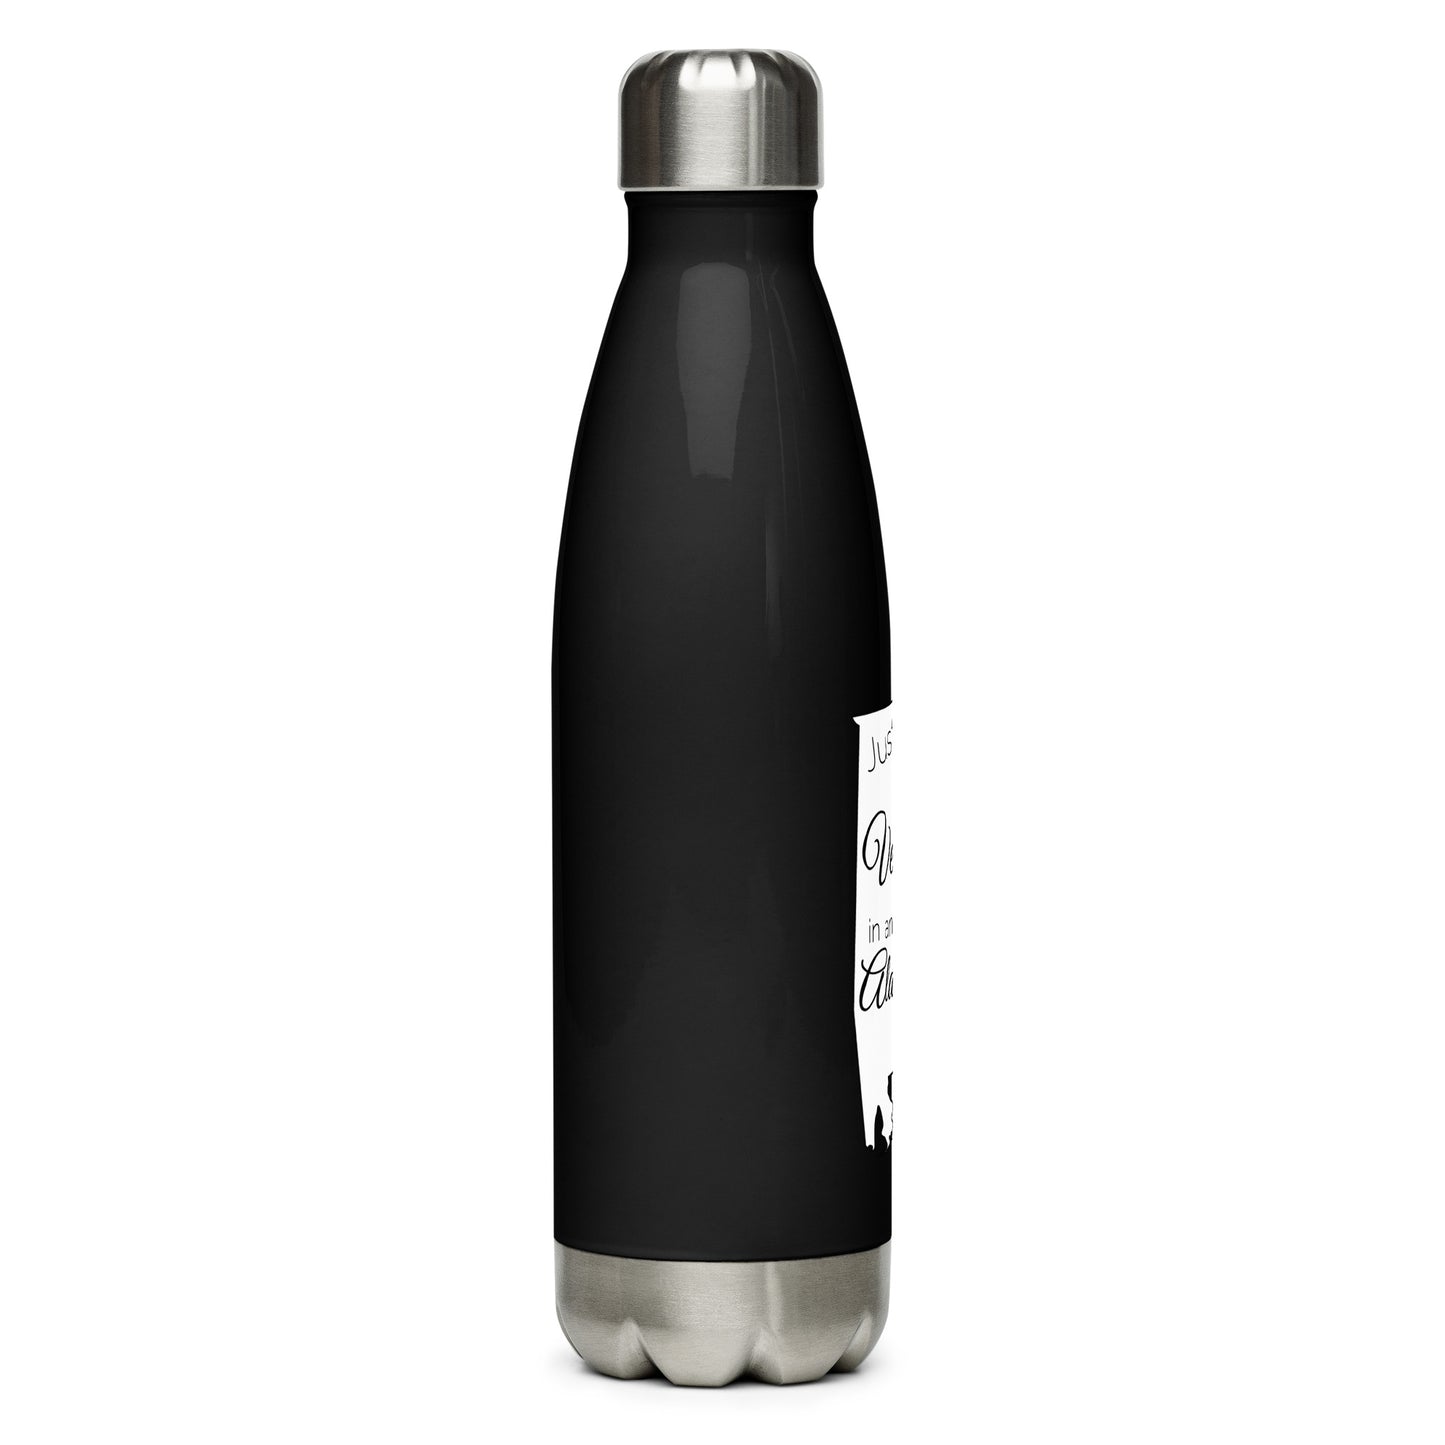 Just a Vermont Girl in an Alabama World Stainless Steel Water Bottle